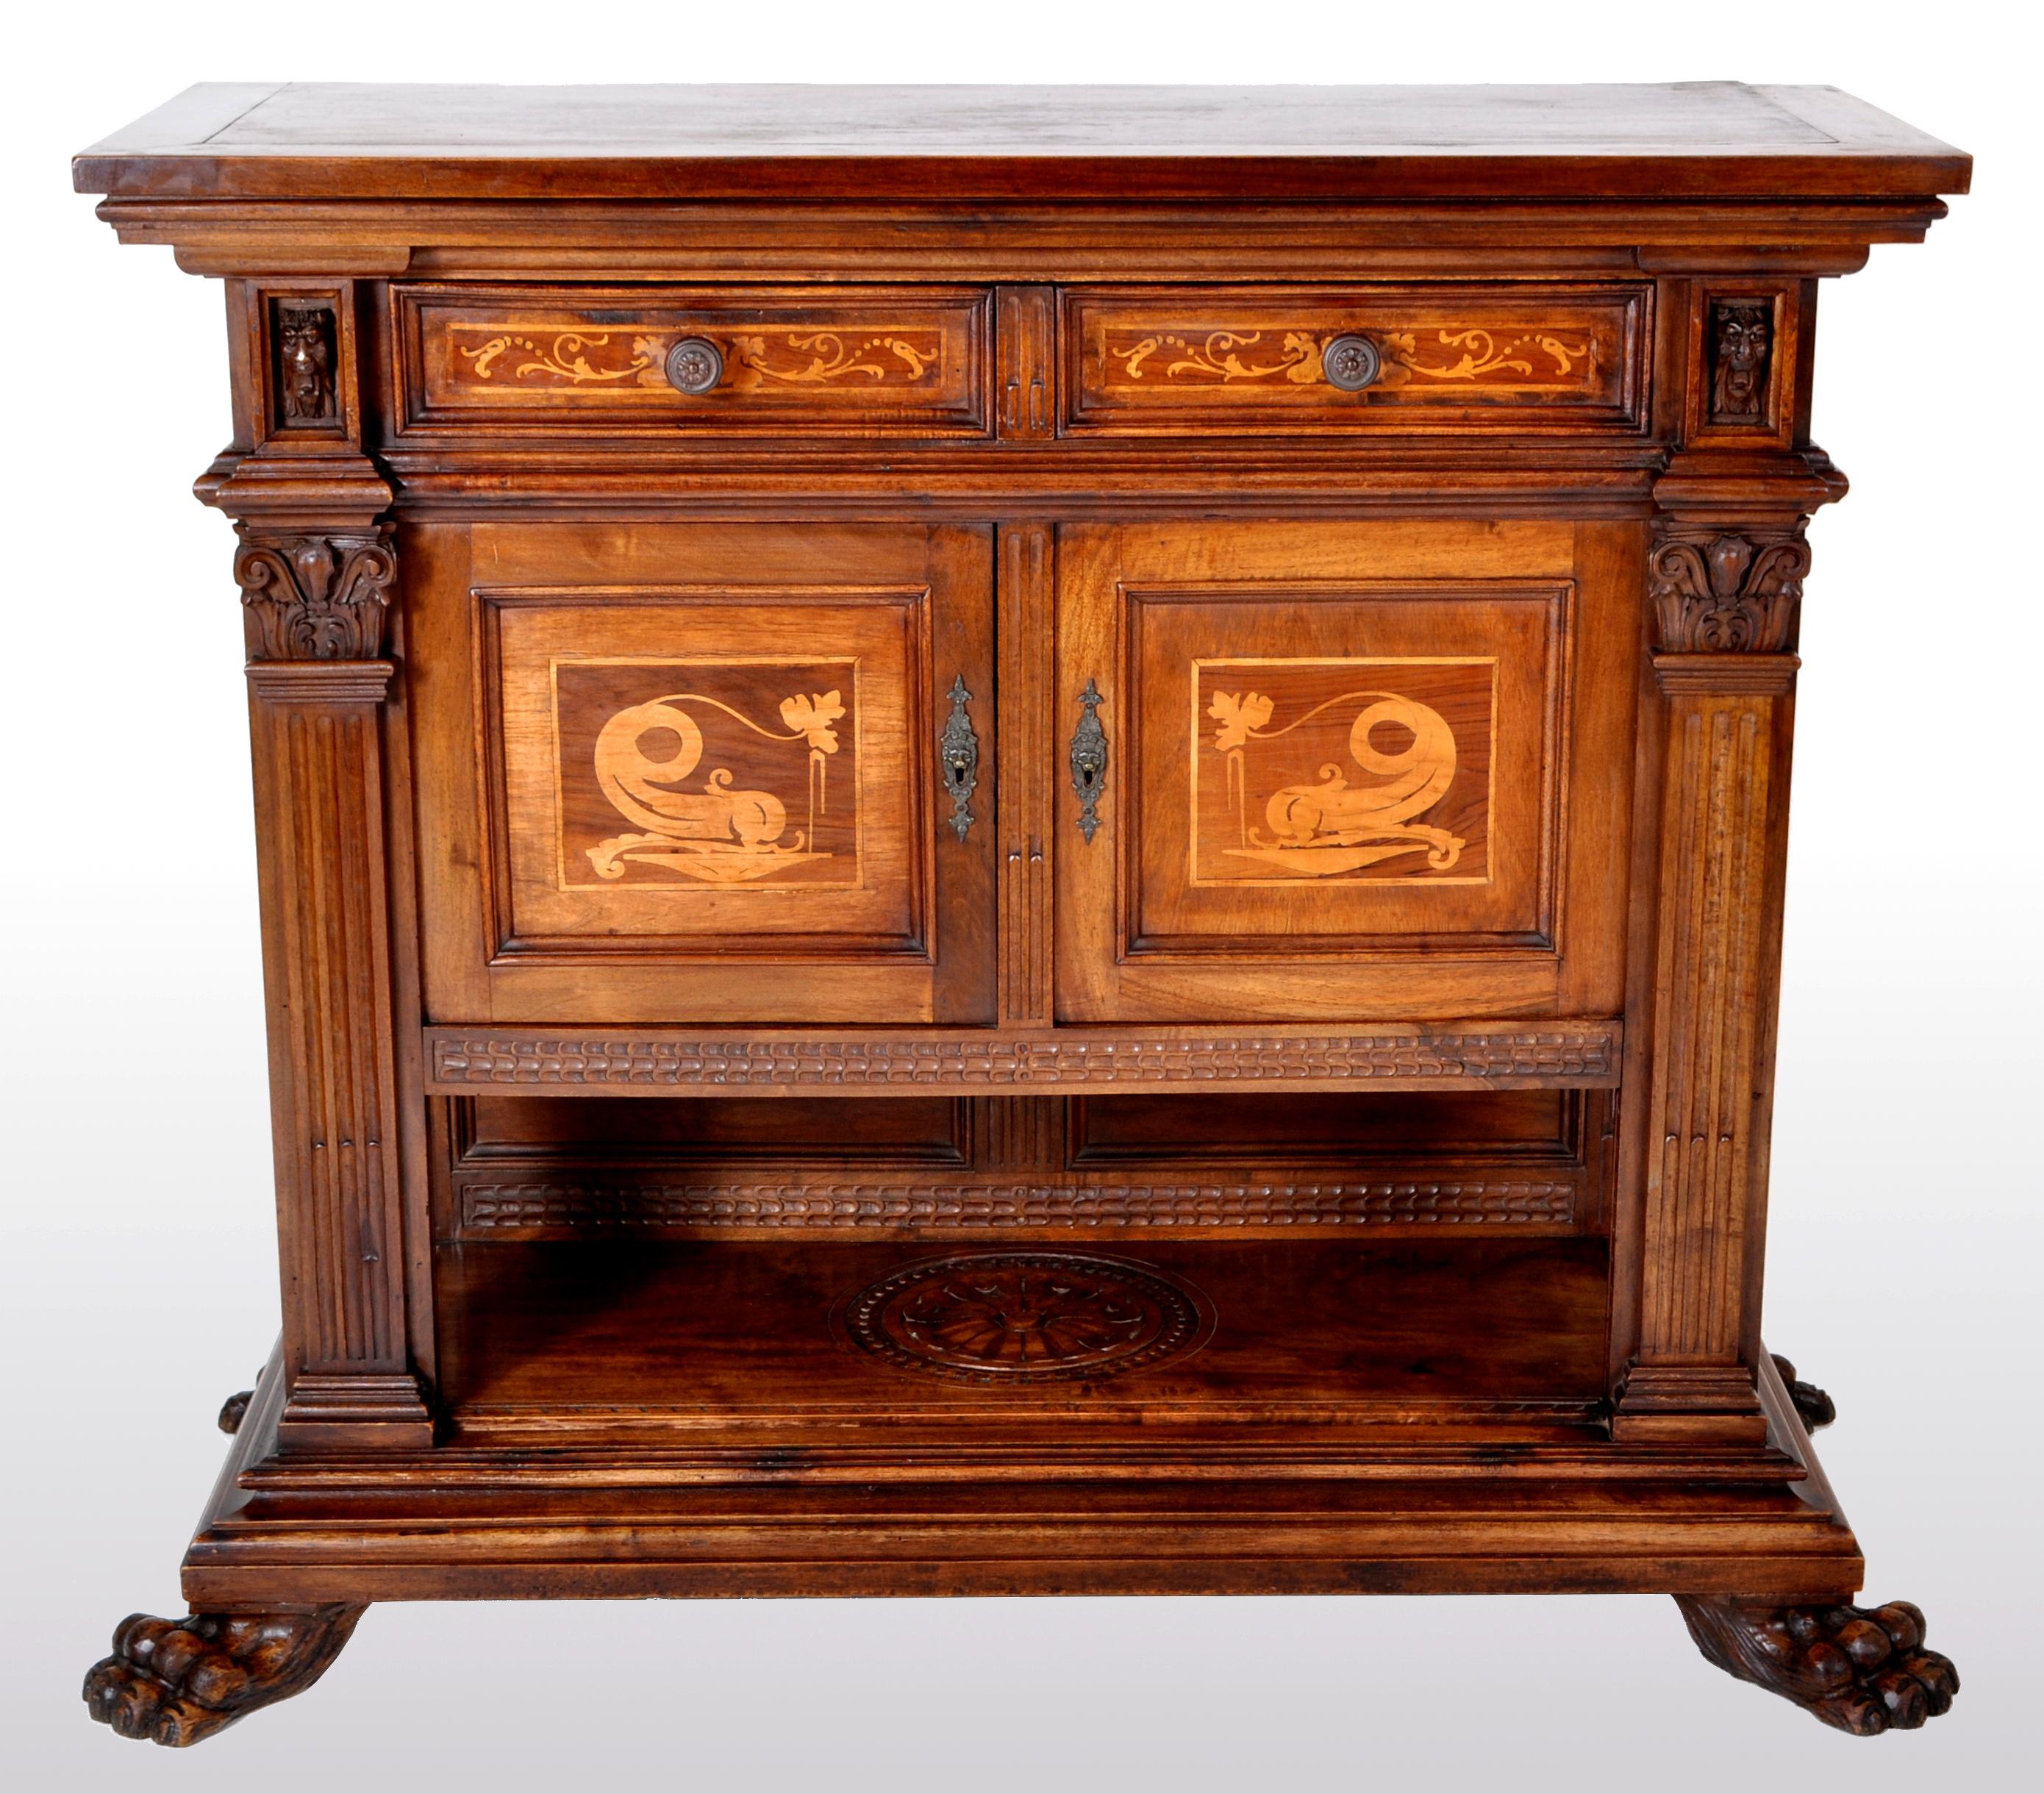 Antique Italian Renaissance Revival walnut marquetry sideboard / cabinet / server, circa 1880. The cabinet having a substantial stepped top and having two drawers below inlaid with floral marquetry and having turned handles. The drawers flanked by a